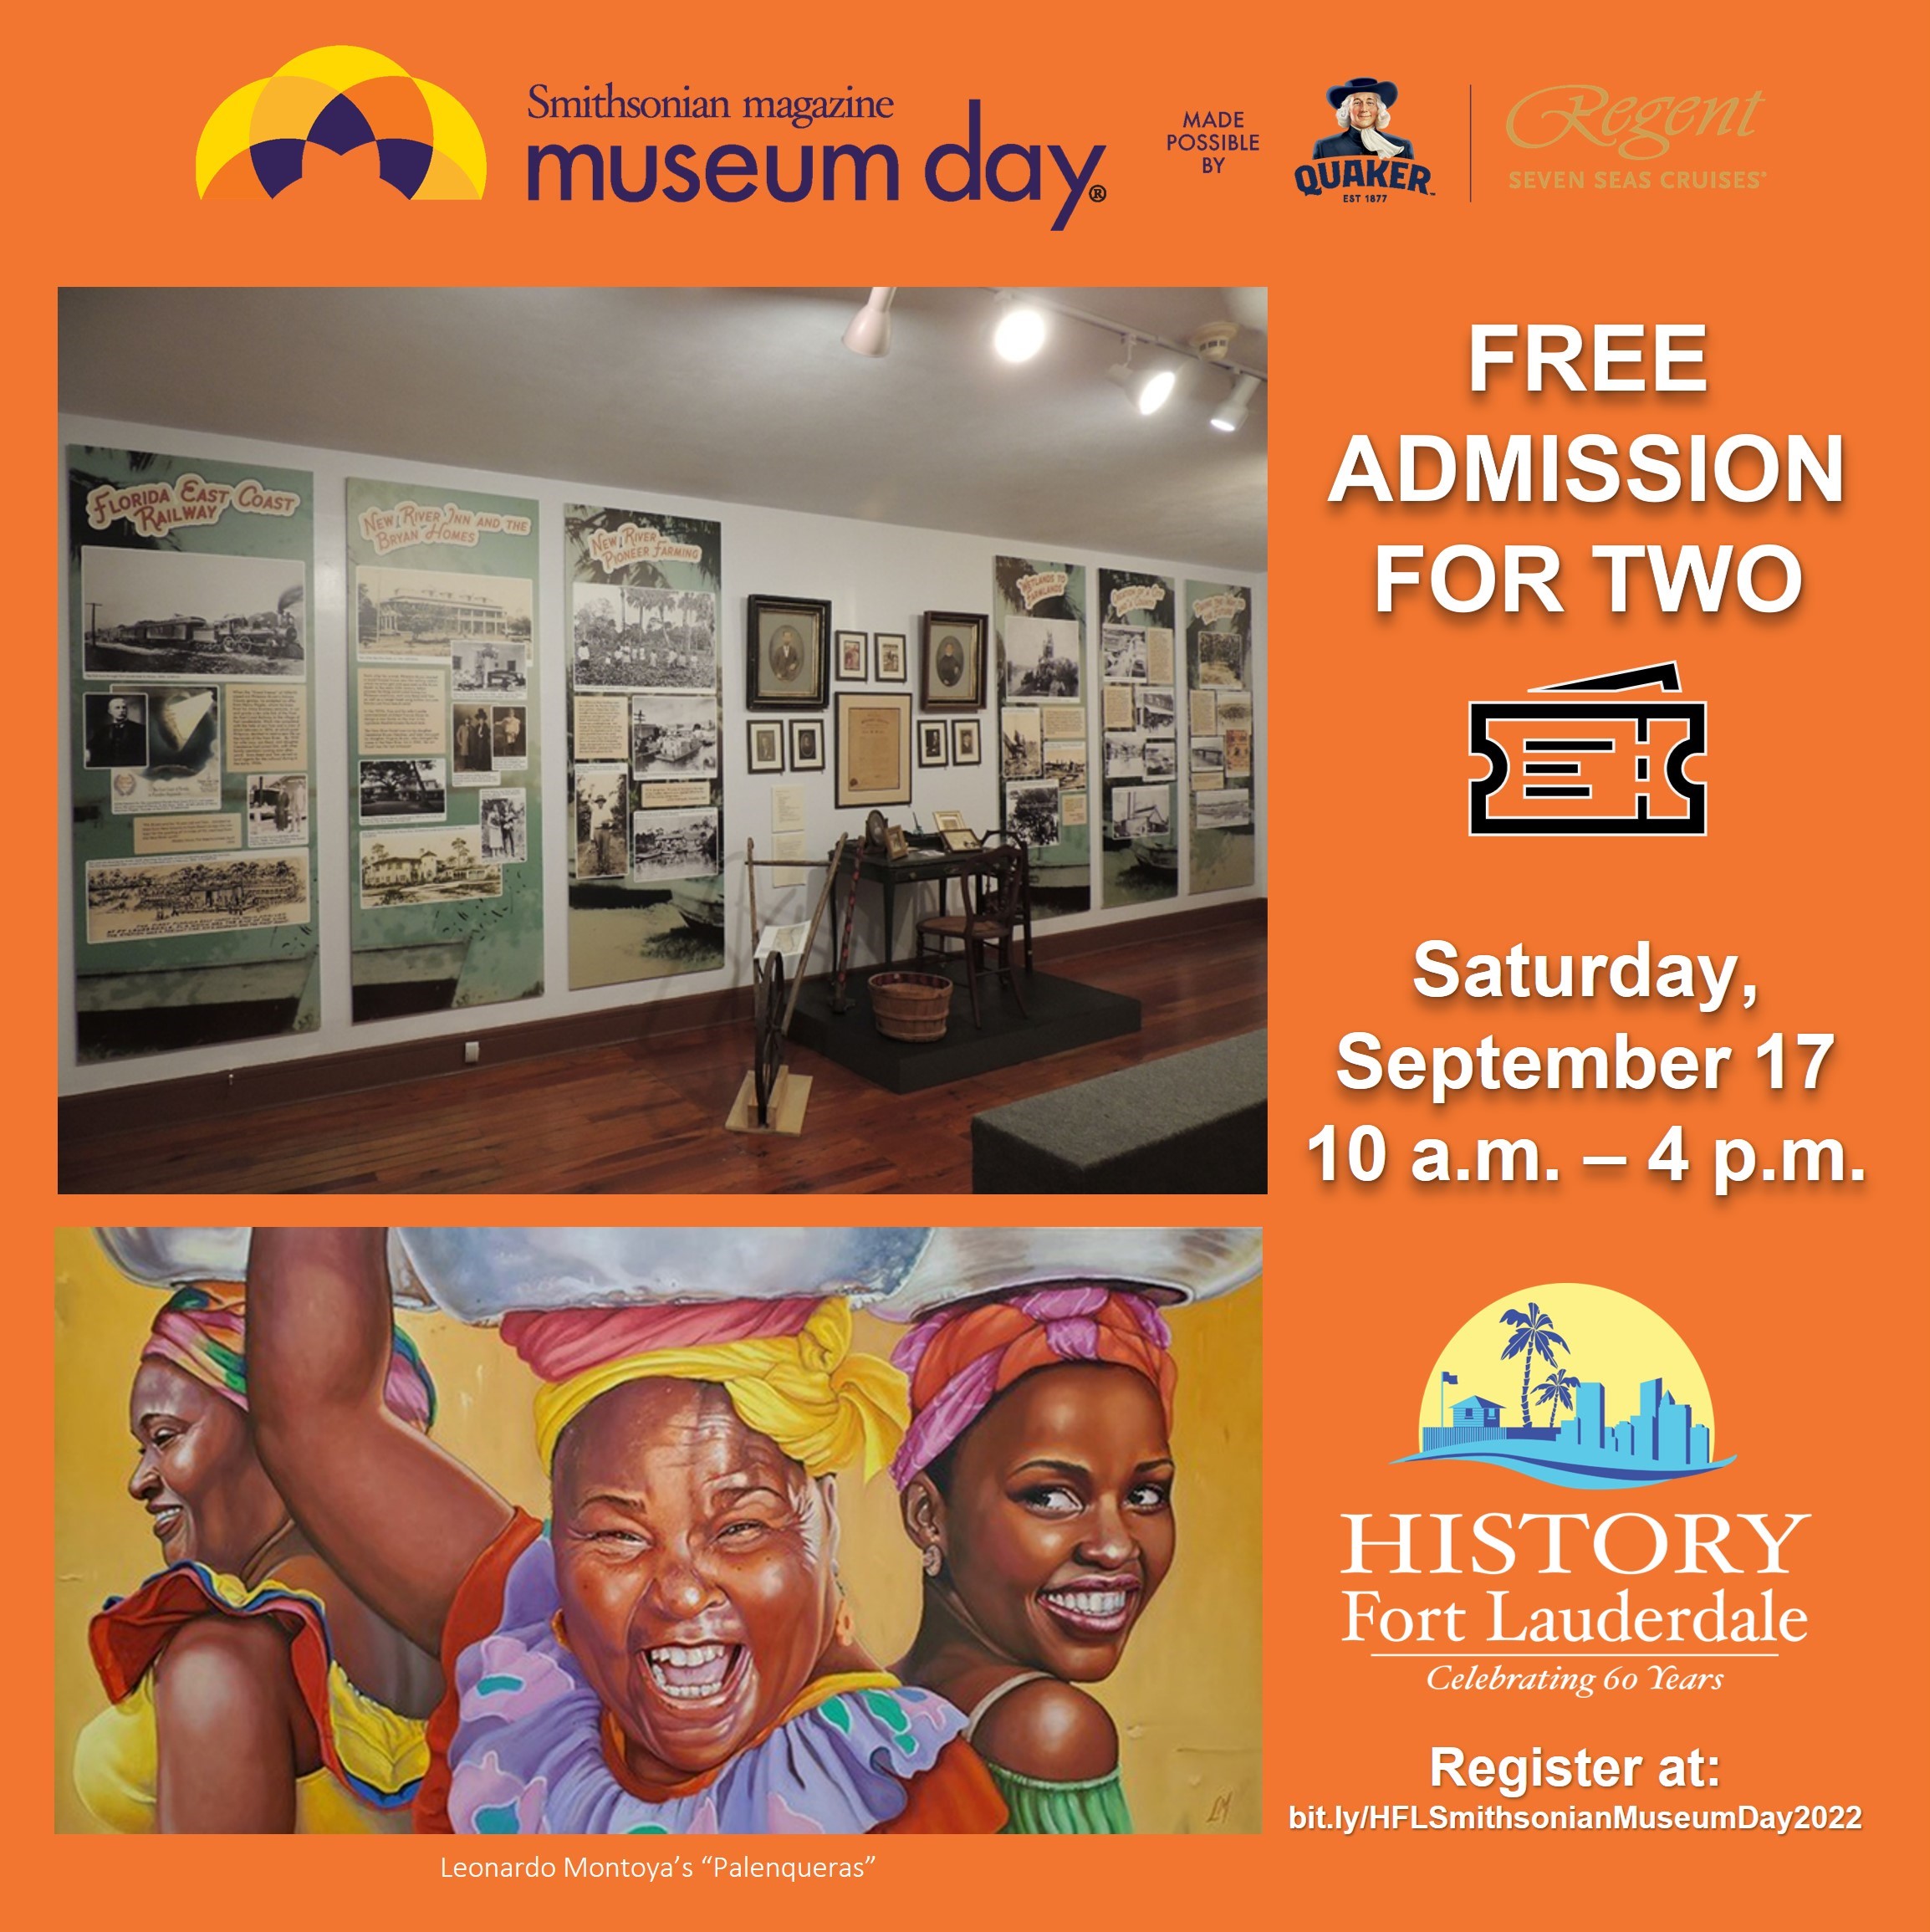 History Fort Lauderdale Takes Part in Smithsonian Museum Day 9/17/22